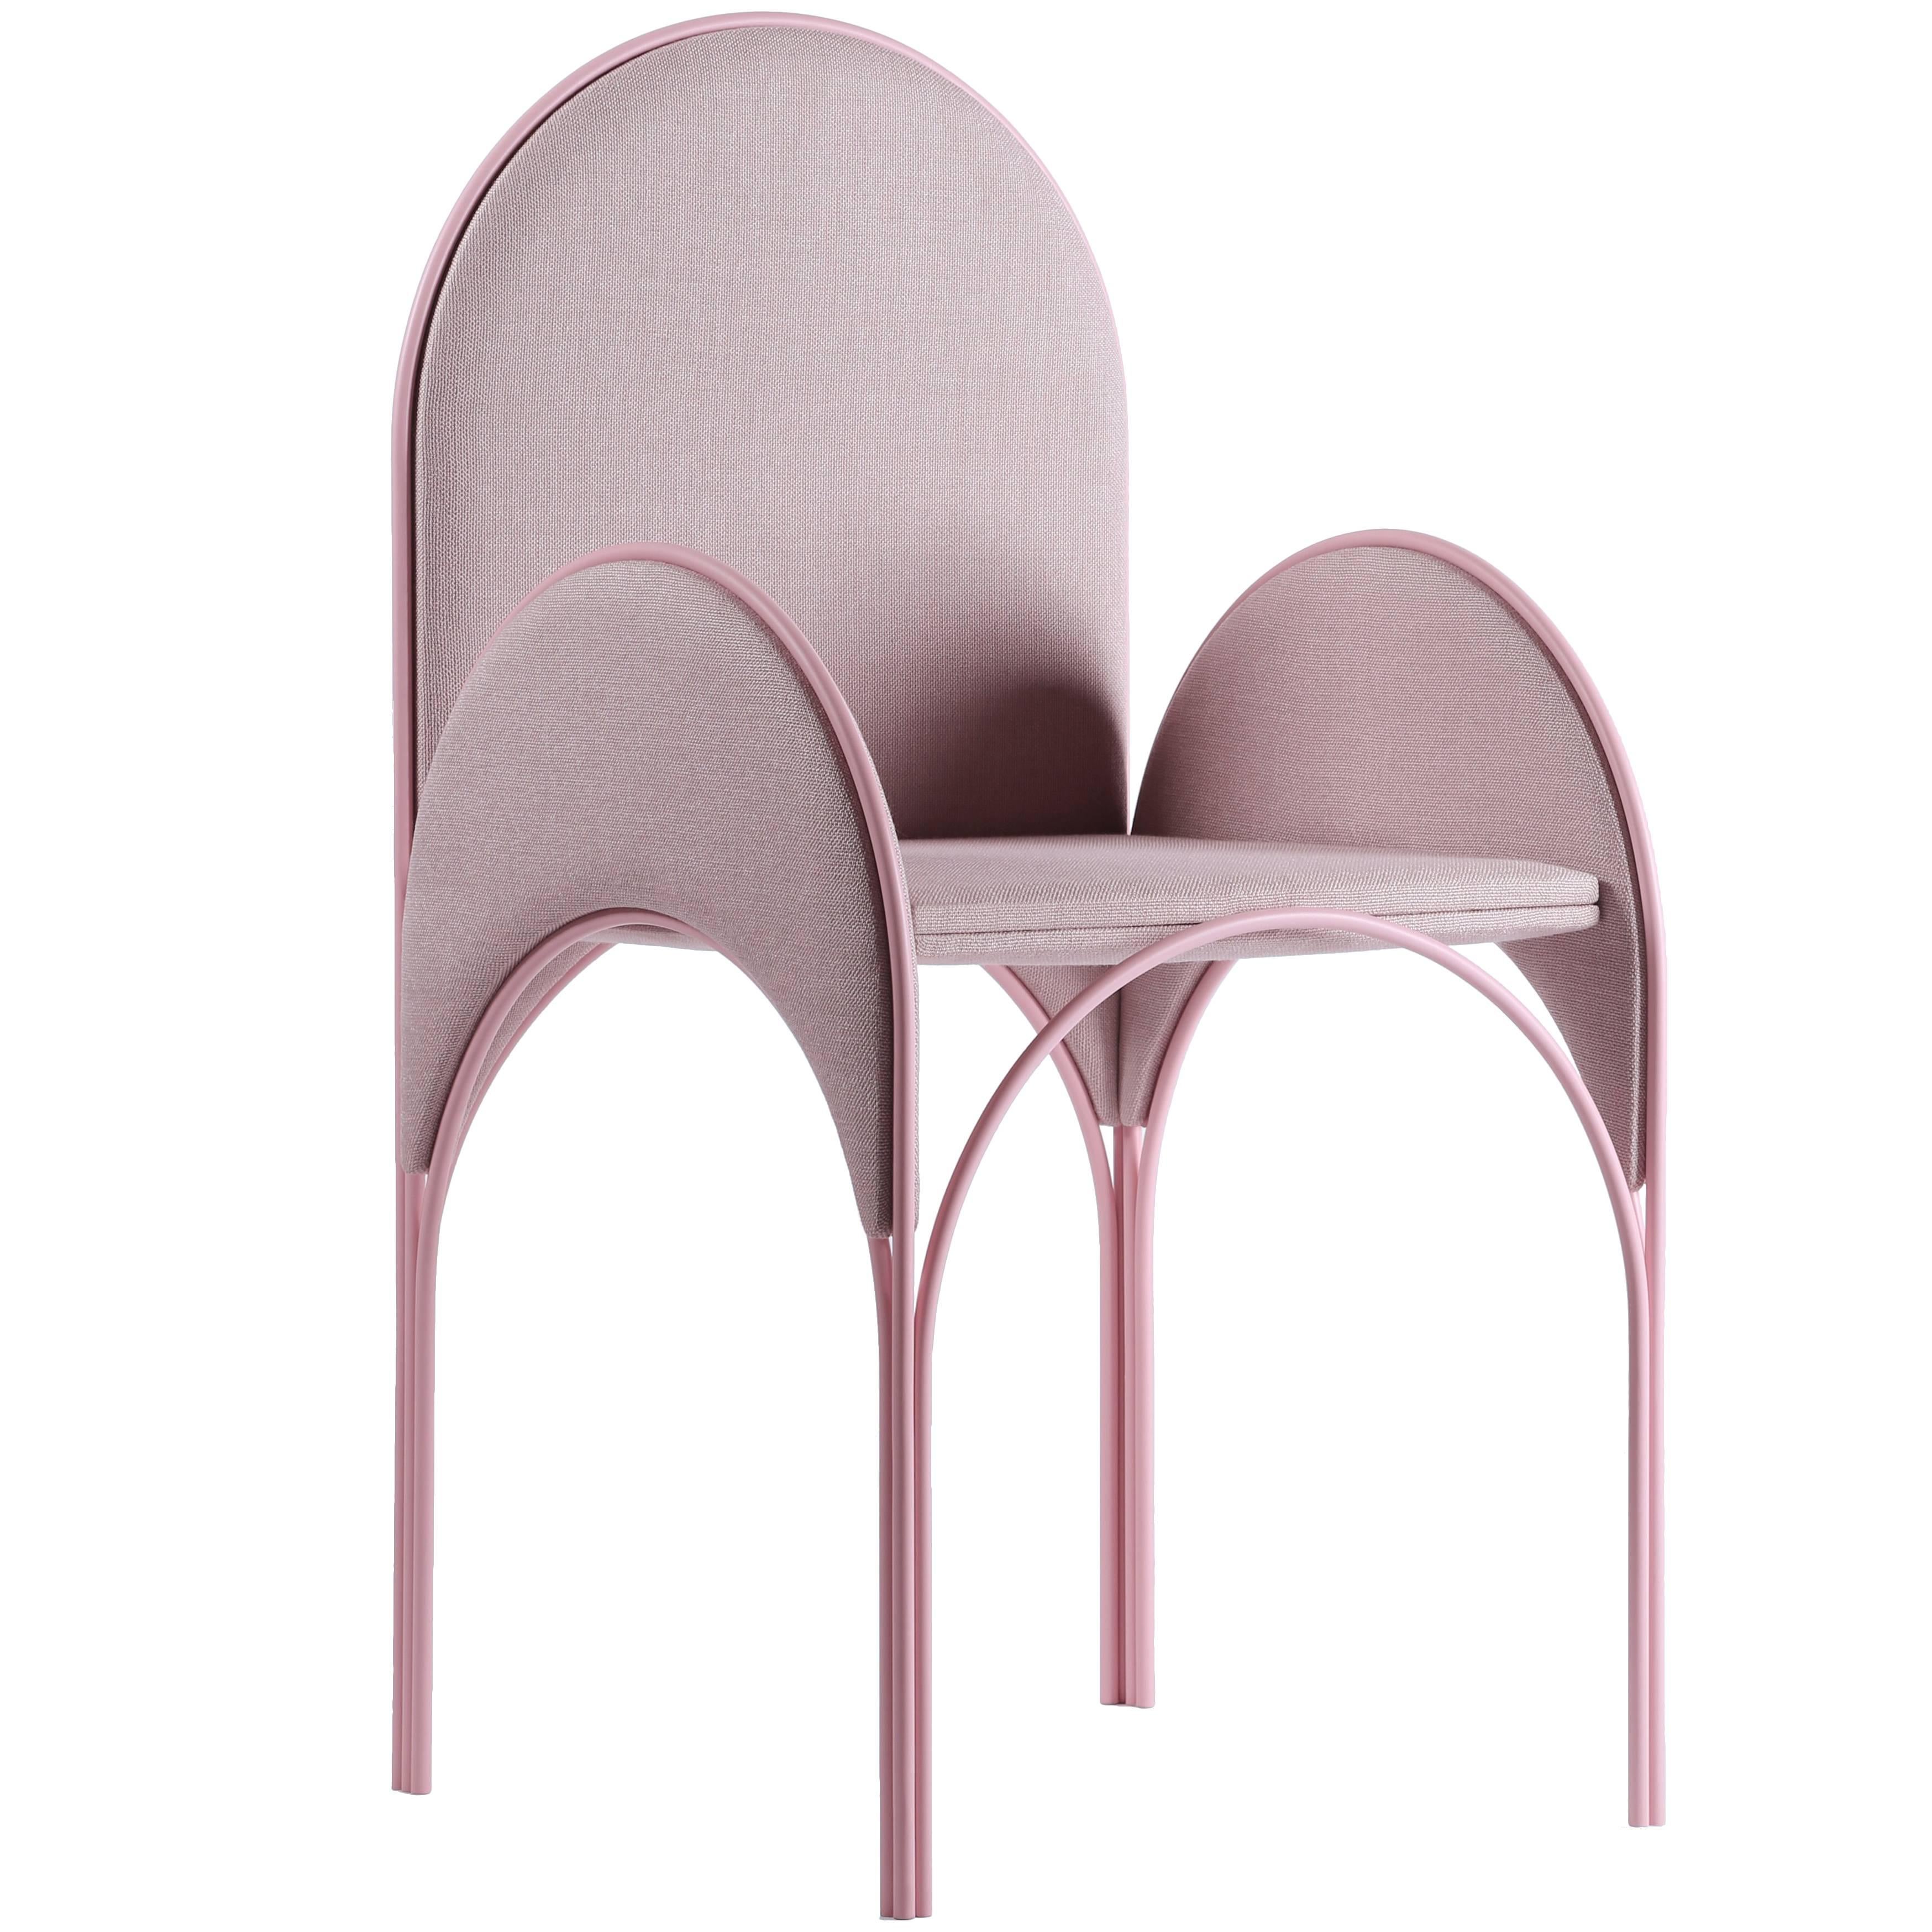 Hawa Beirut Fully Upholstered Pink Chair by Richard Yasmine For Sale